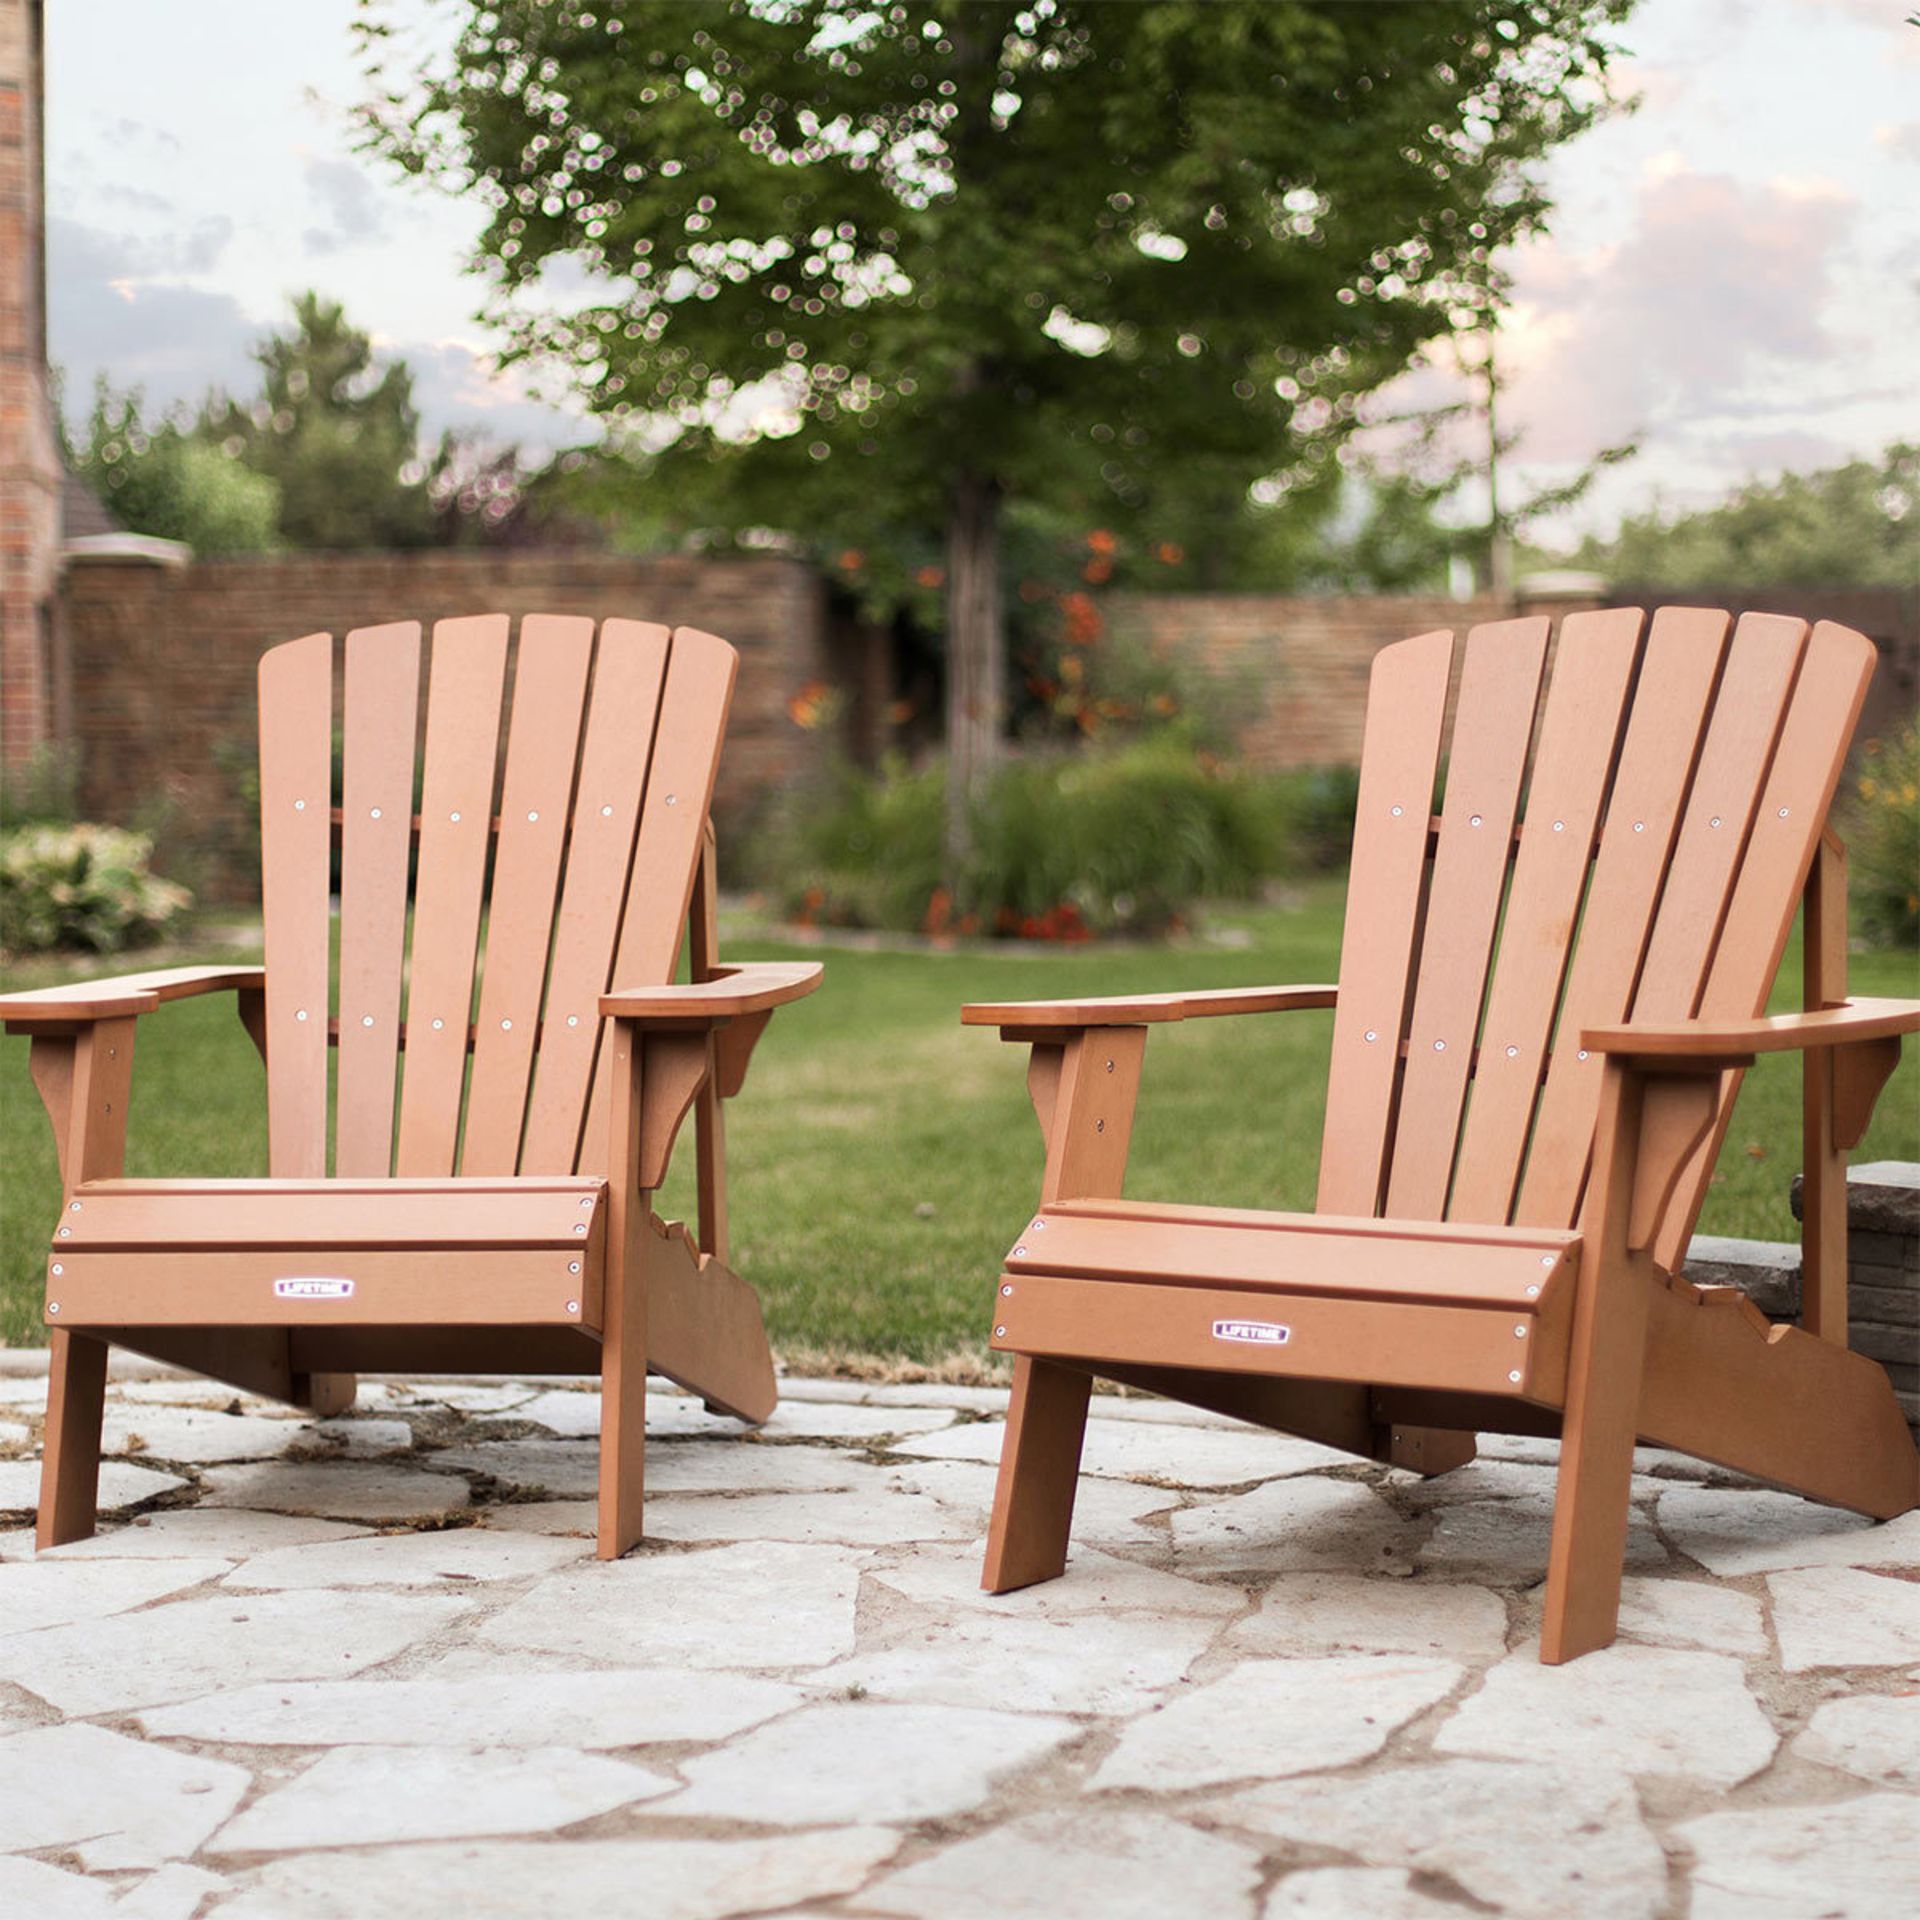 1 SET OF 2 LIFETIME ADIRONDACK CHAIRS RRP Â£399 (1 CHAIR BROKEN, PICTURES FOR ILLUSTRATION